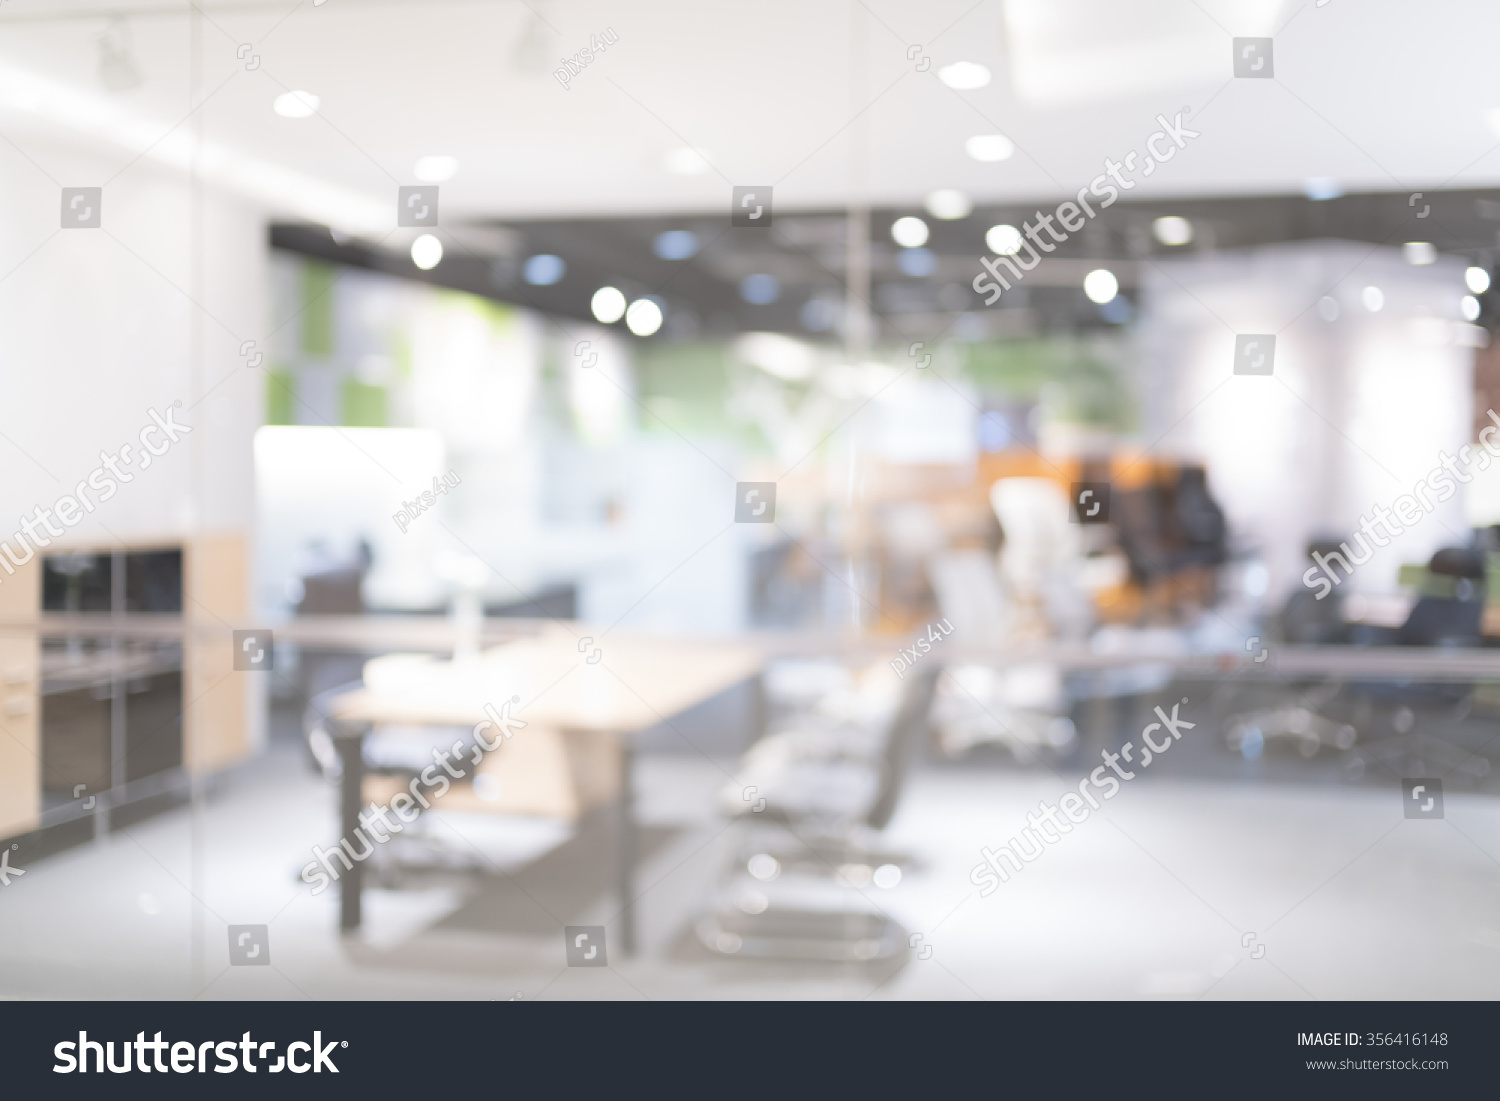 Blurred of office - ideal for presentation background. #356416148